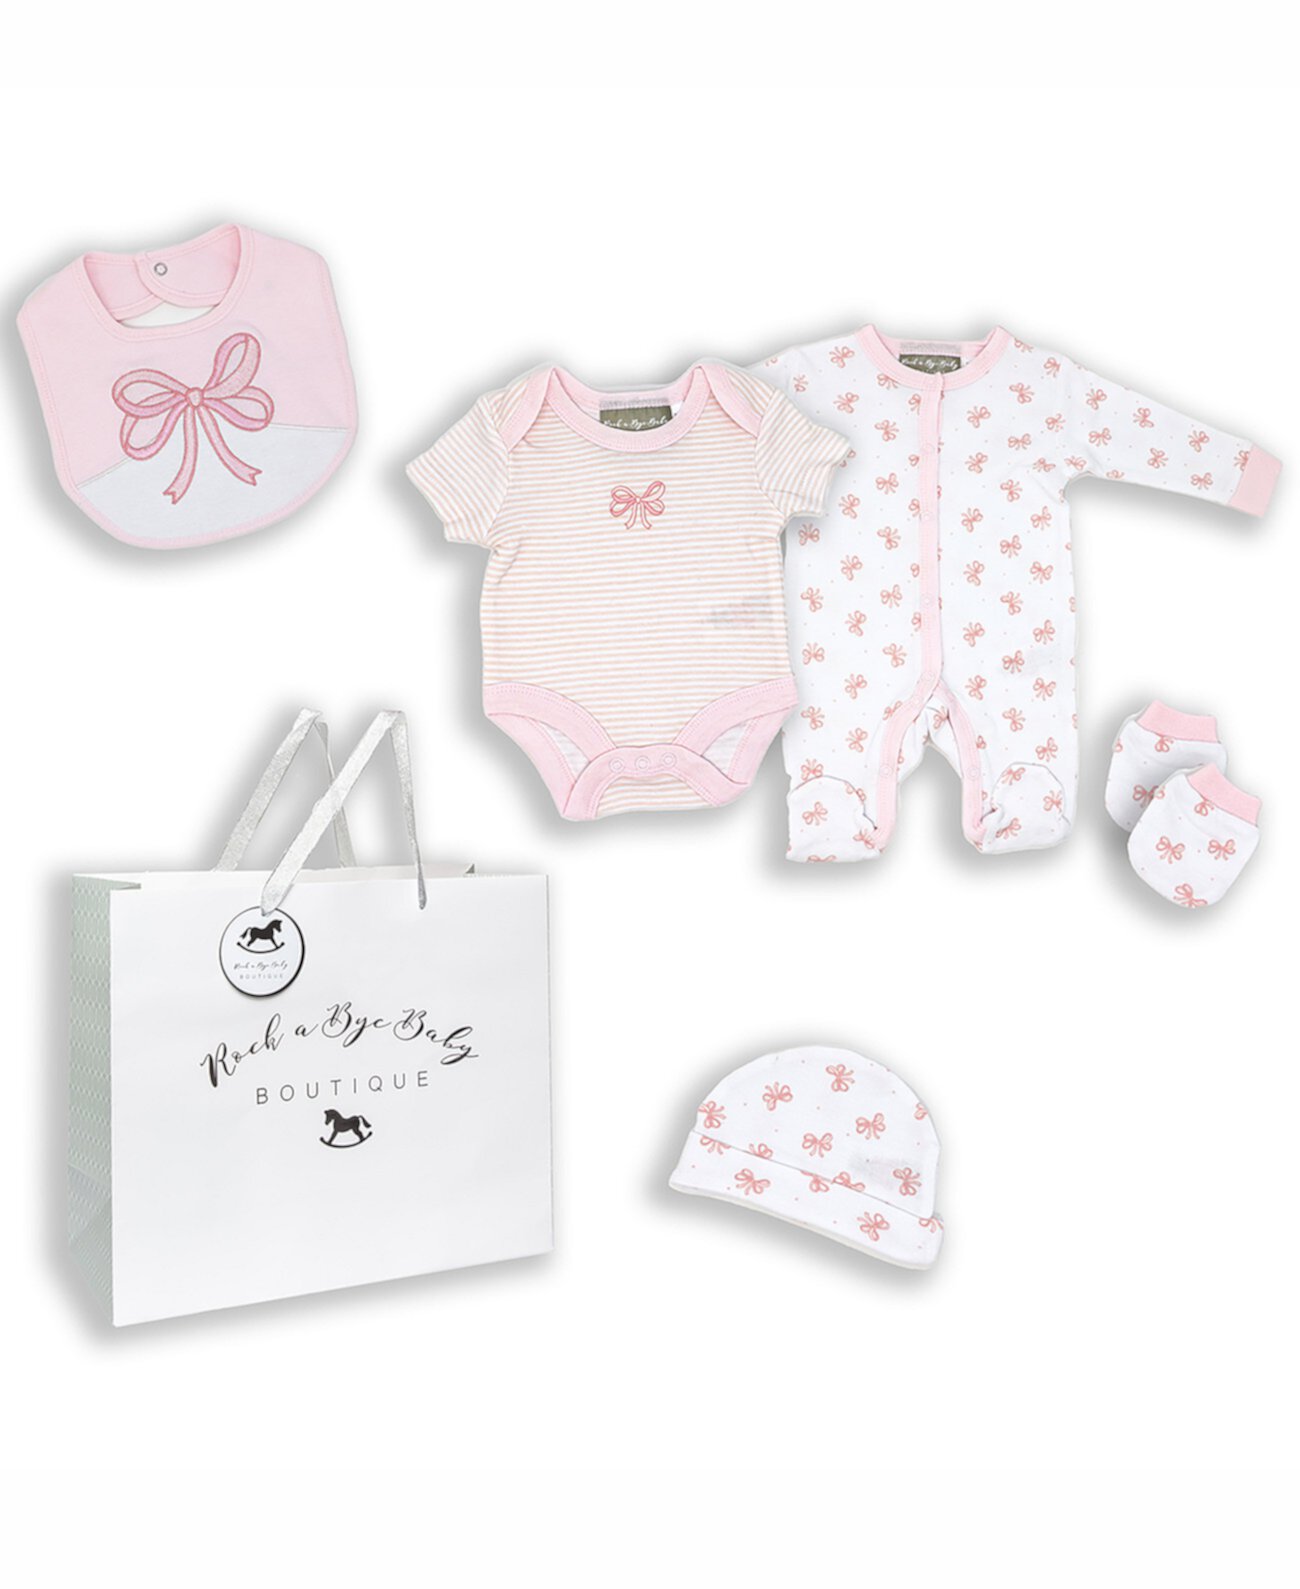 Baby Girls Bow Layette Gift в сетчатом мешке, набор из 5 предметов Rock-A-Bye Baby Boutique